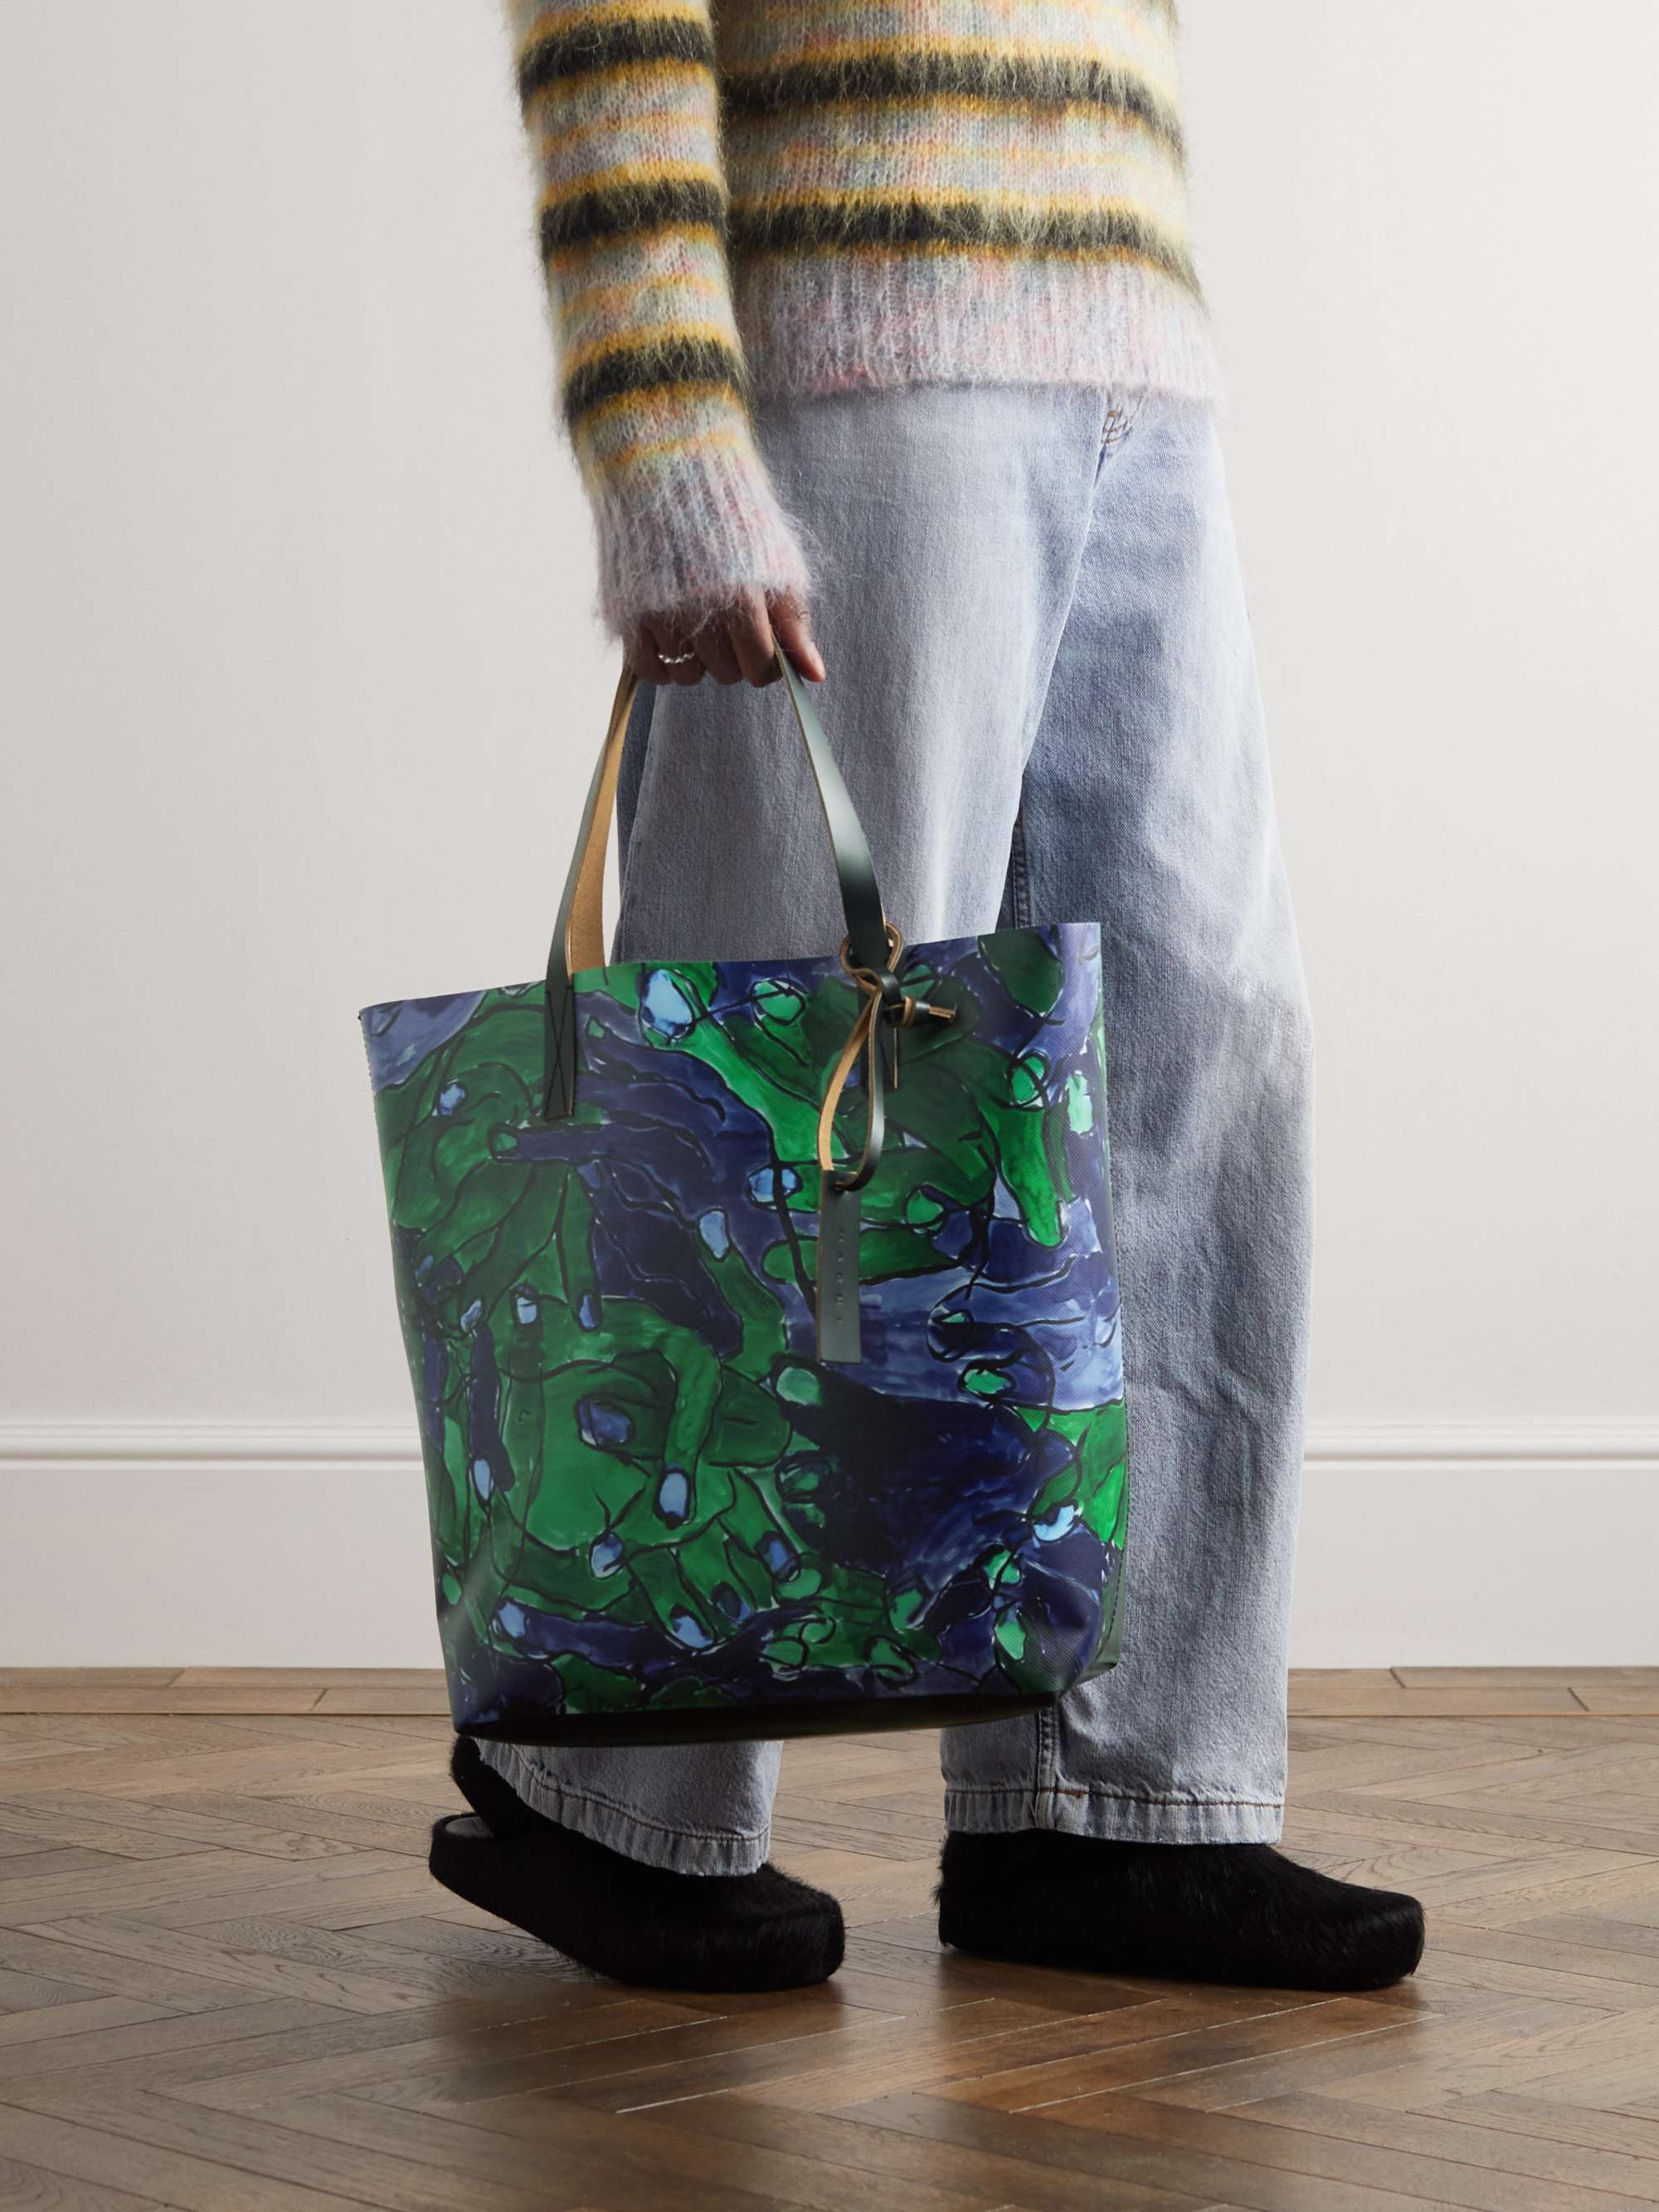 MARNI North/South Leather-Trimmed Printed Shell Tote Bag